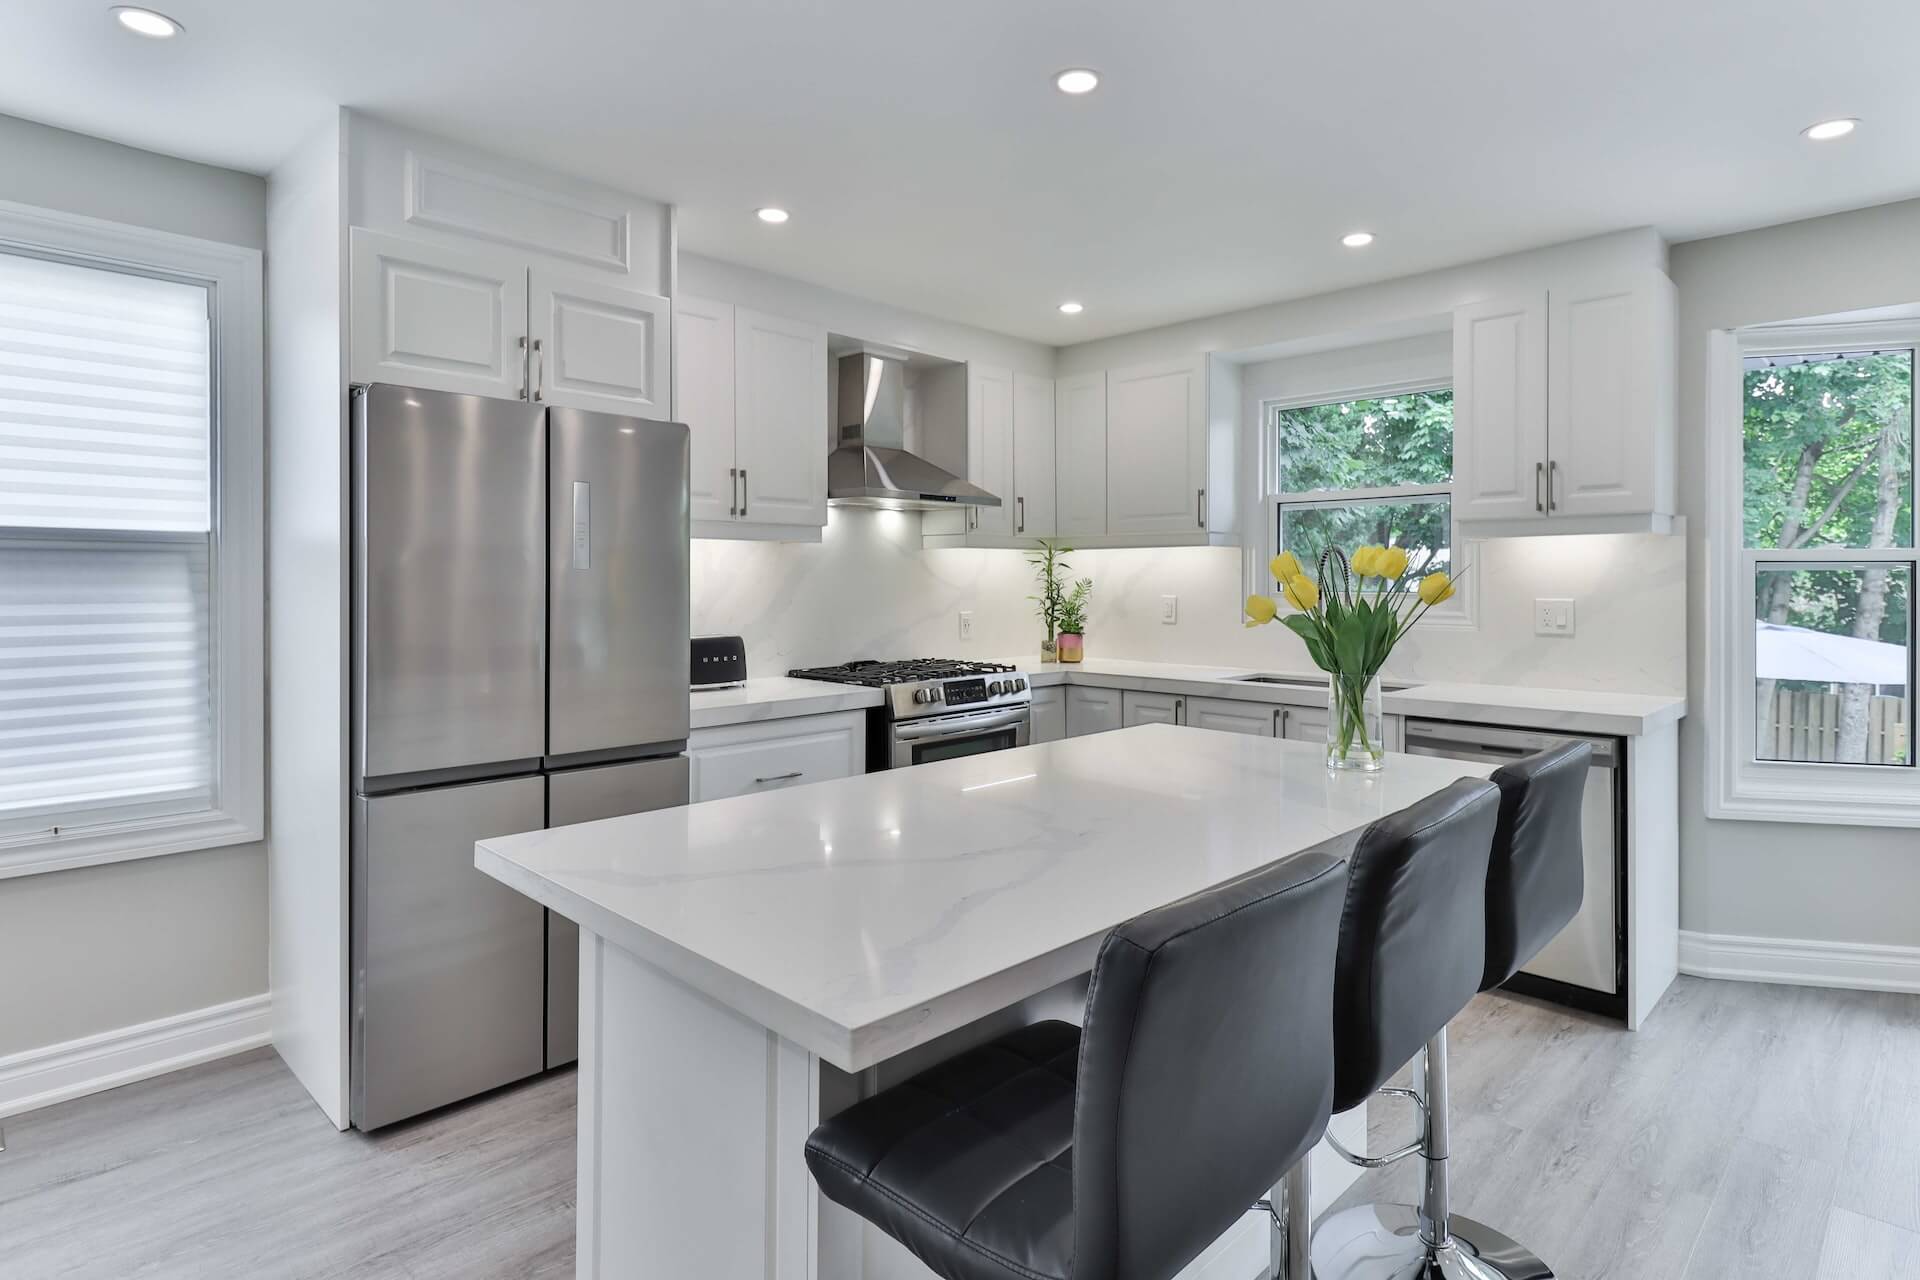 White cabinets are a timeless and popular cabinet color this year